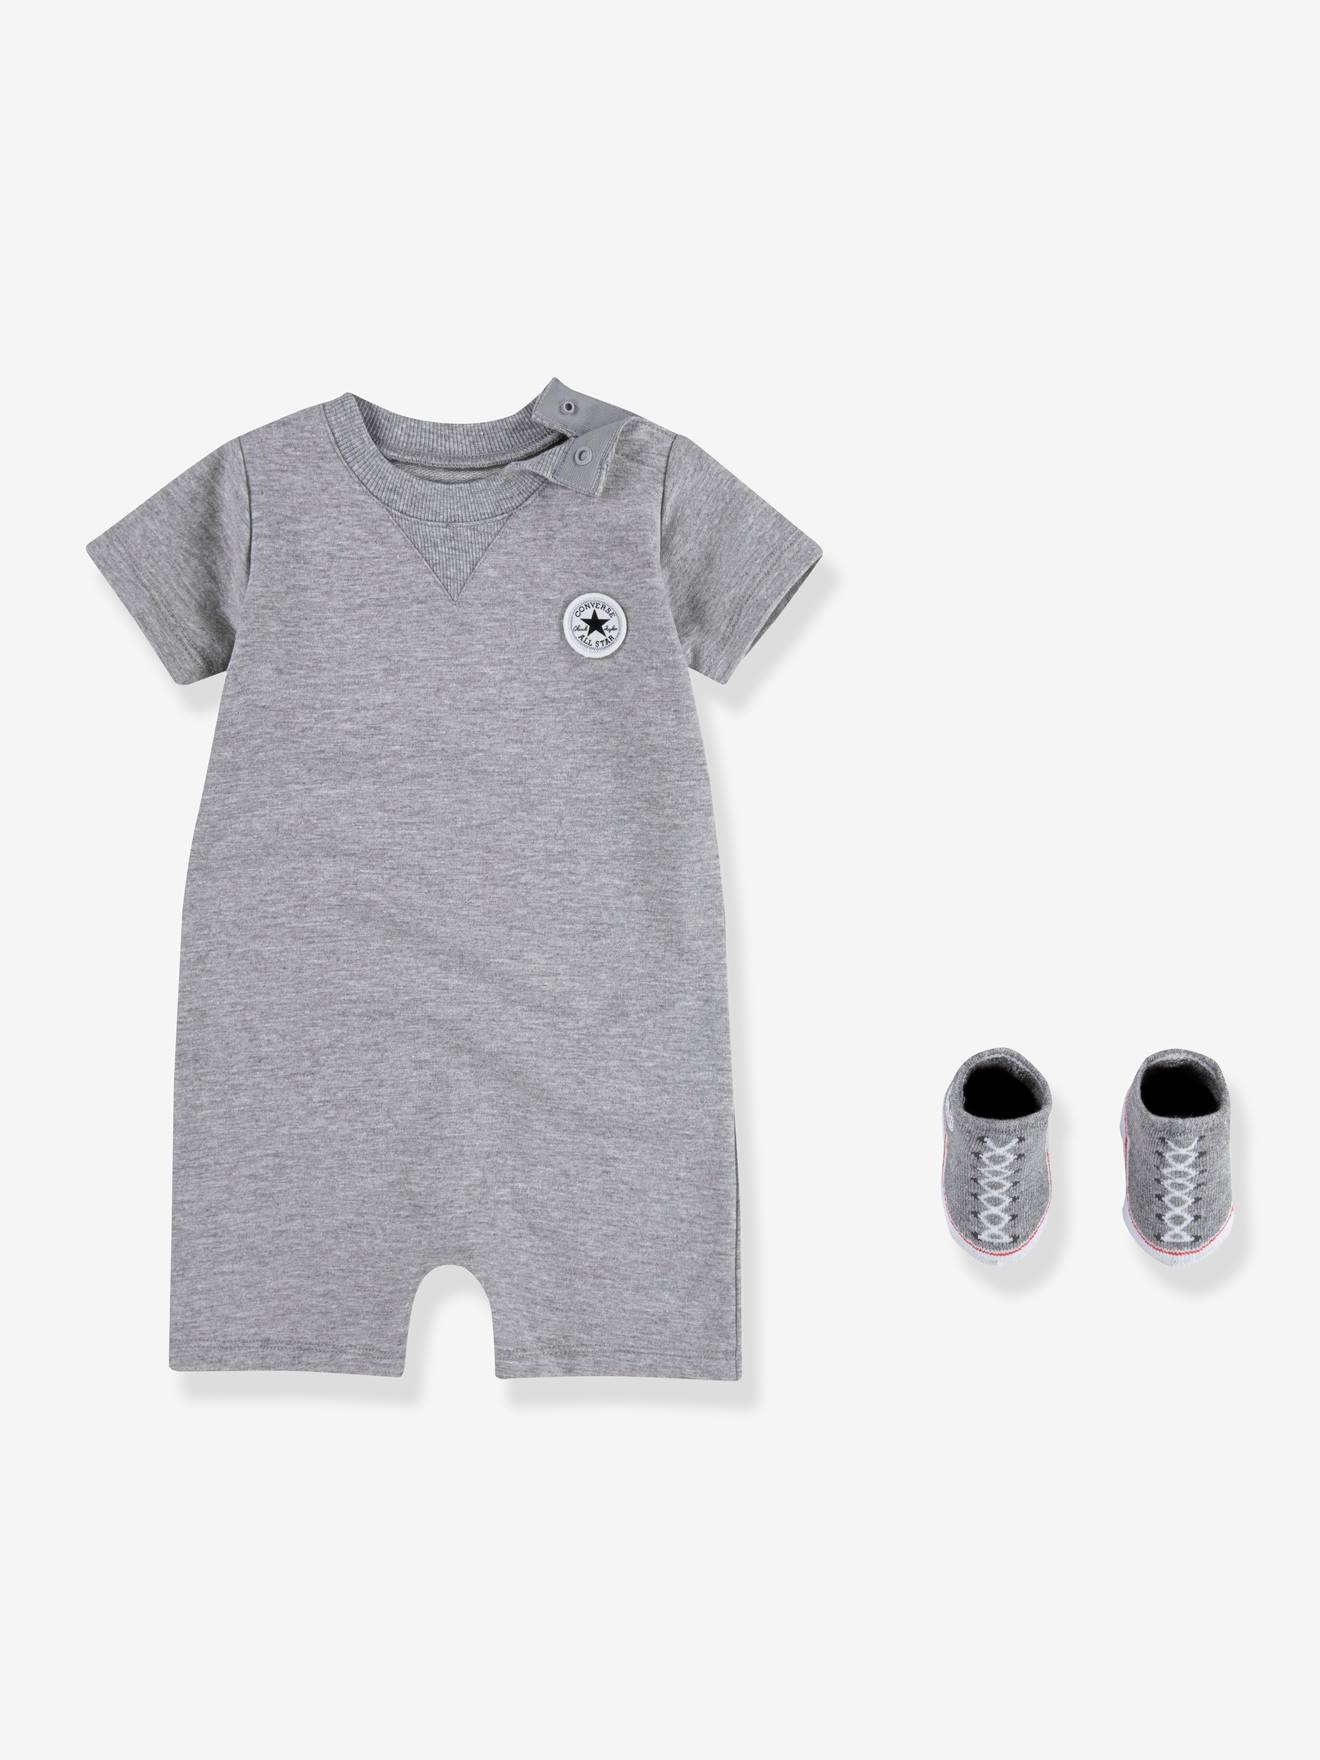 Set of 2 Items: Jumpsuit + Socks, Lil Chuck by CONVERSE grey